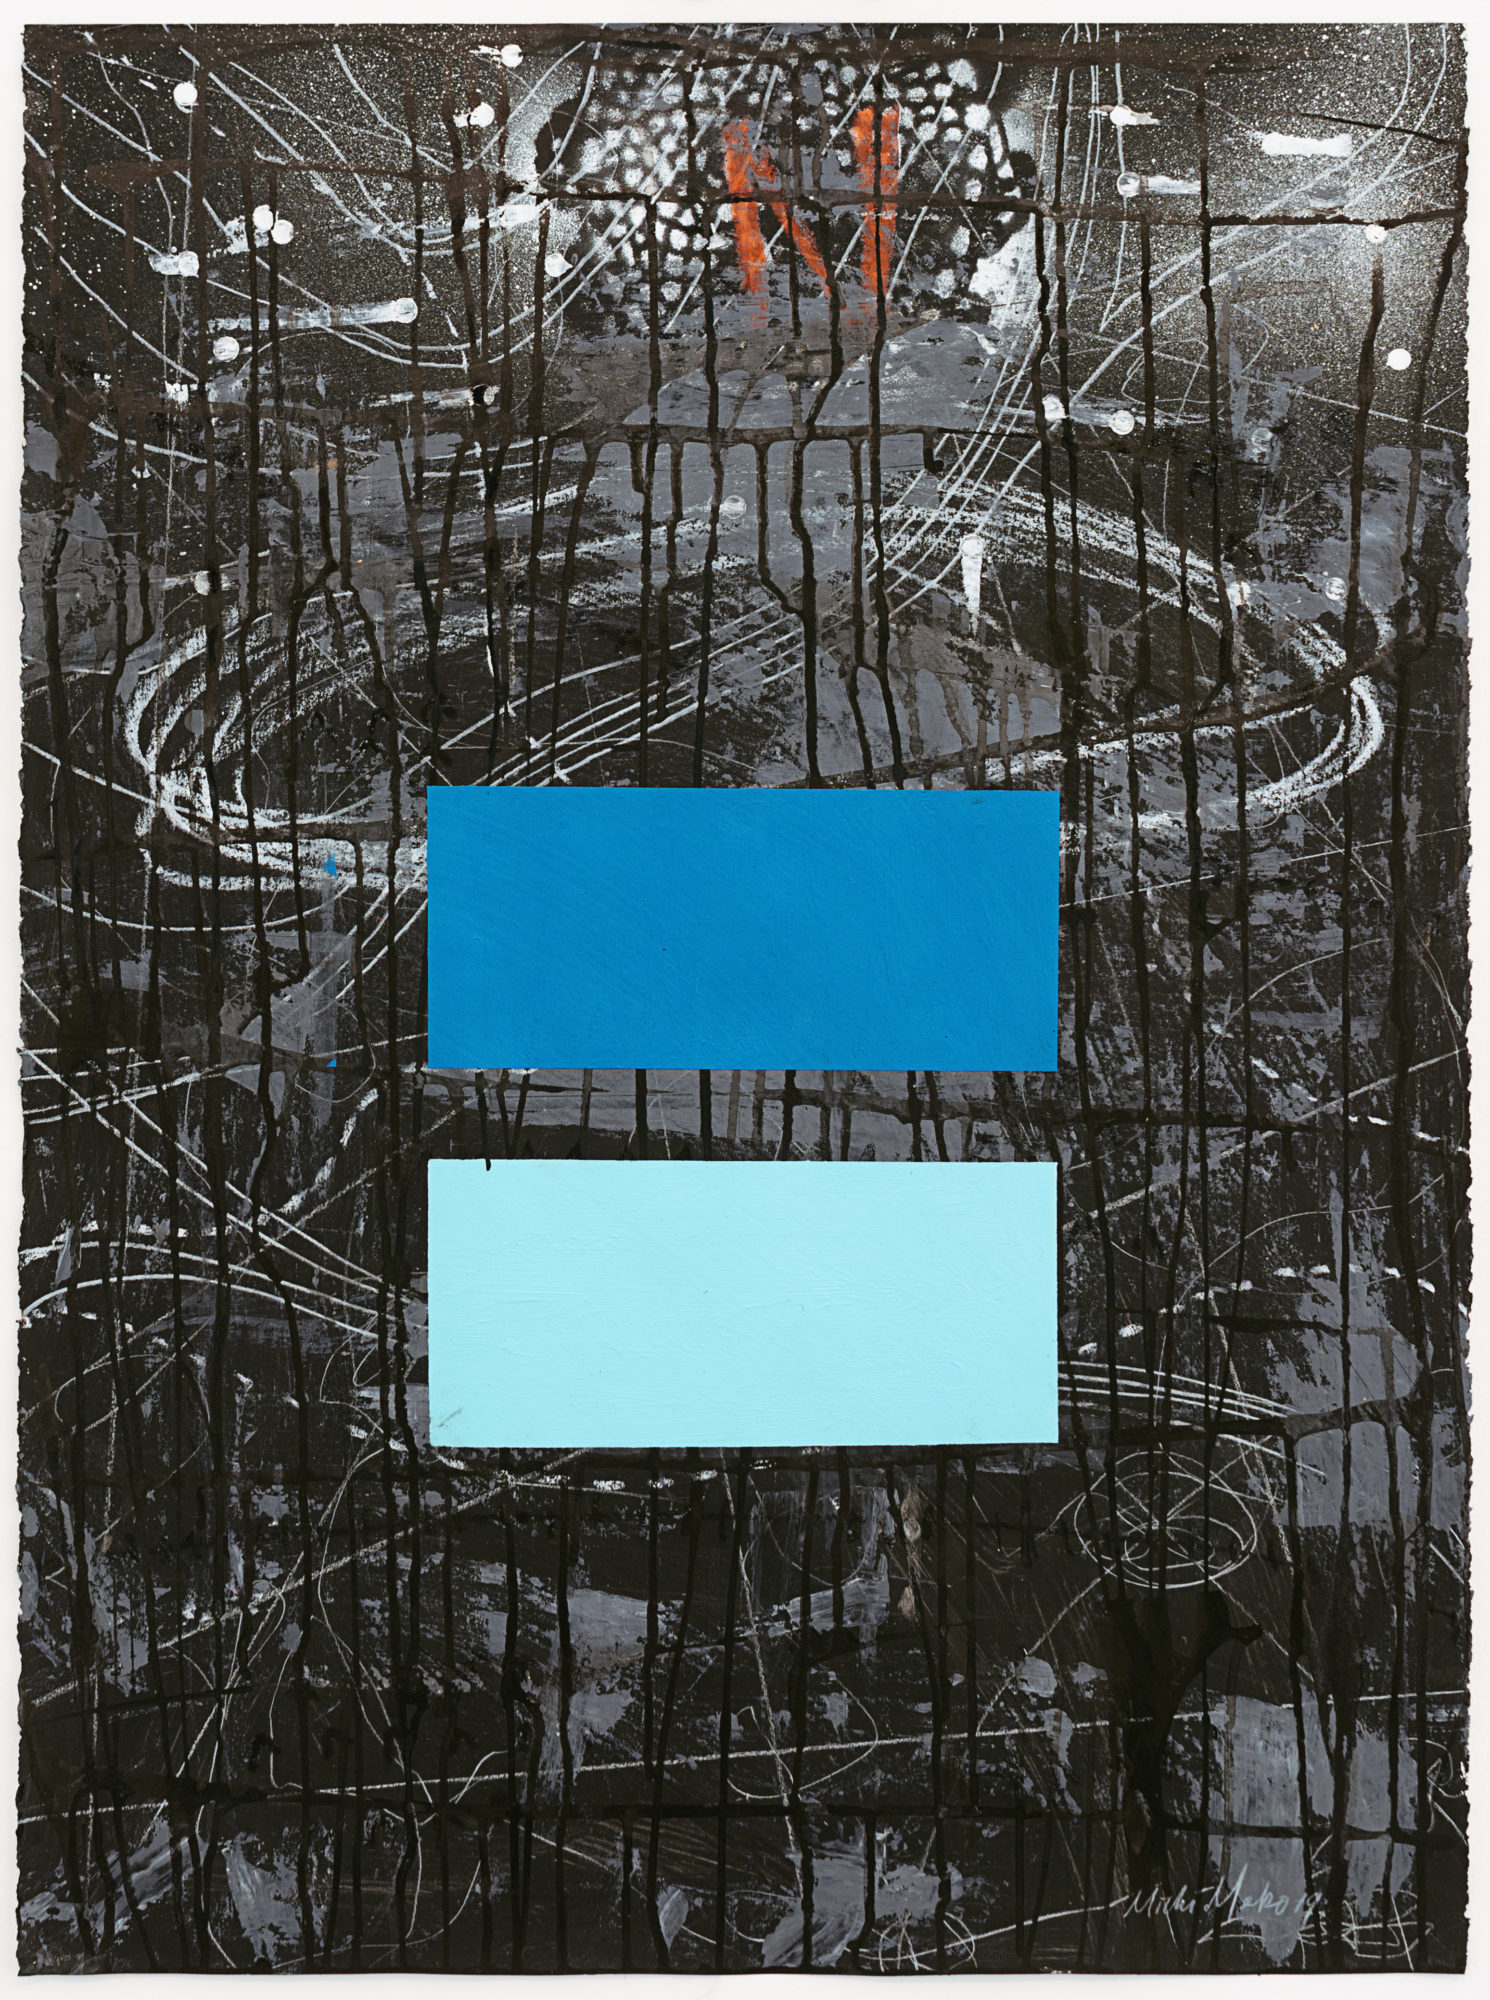 A multi-media work containing black and white elements and two differing shades of horizontal blue rectangles in the lower-center